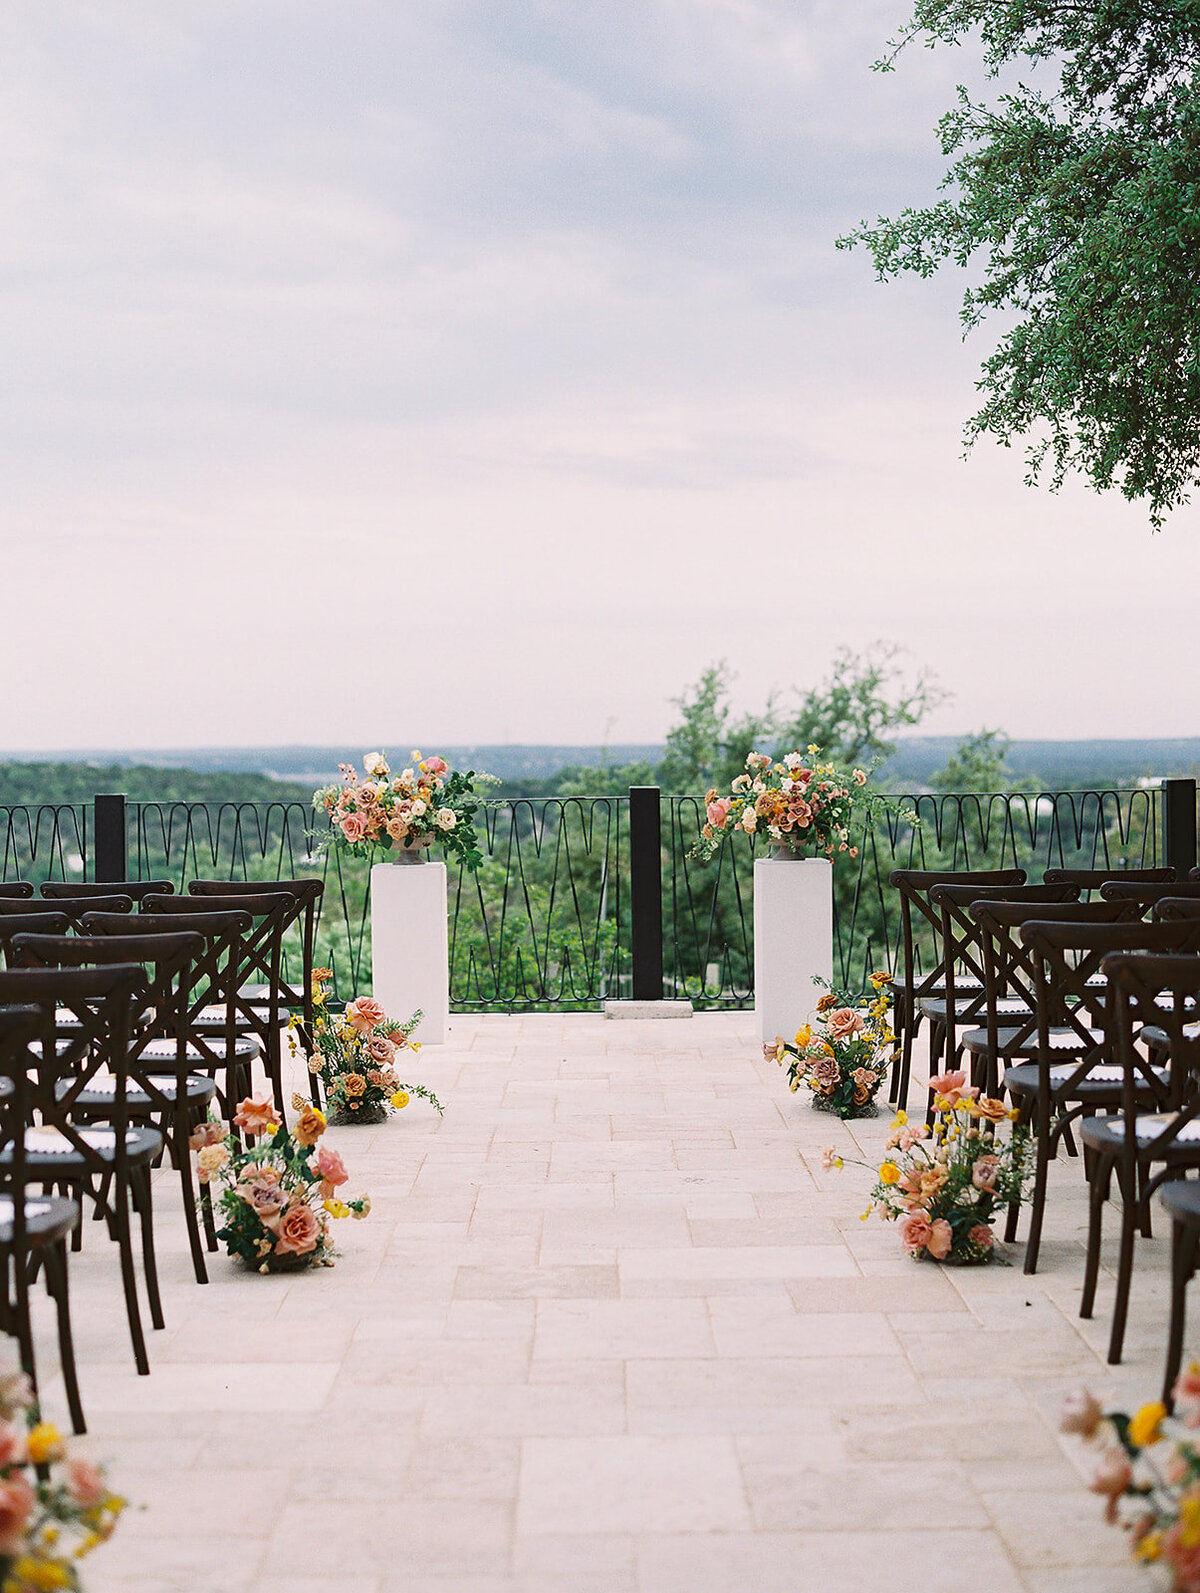 The romantic and simple ceremony decor overlooking the Texas Hill Country